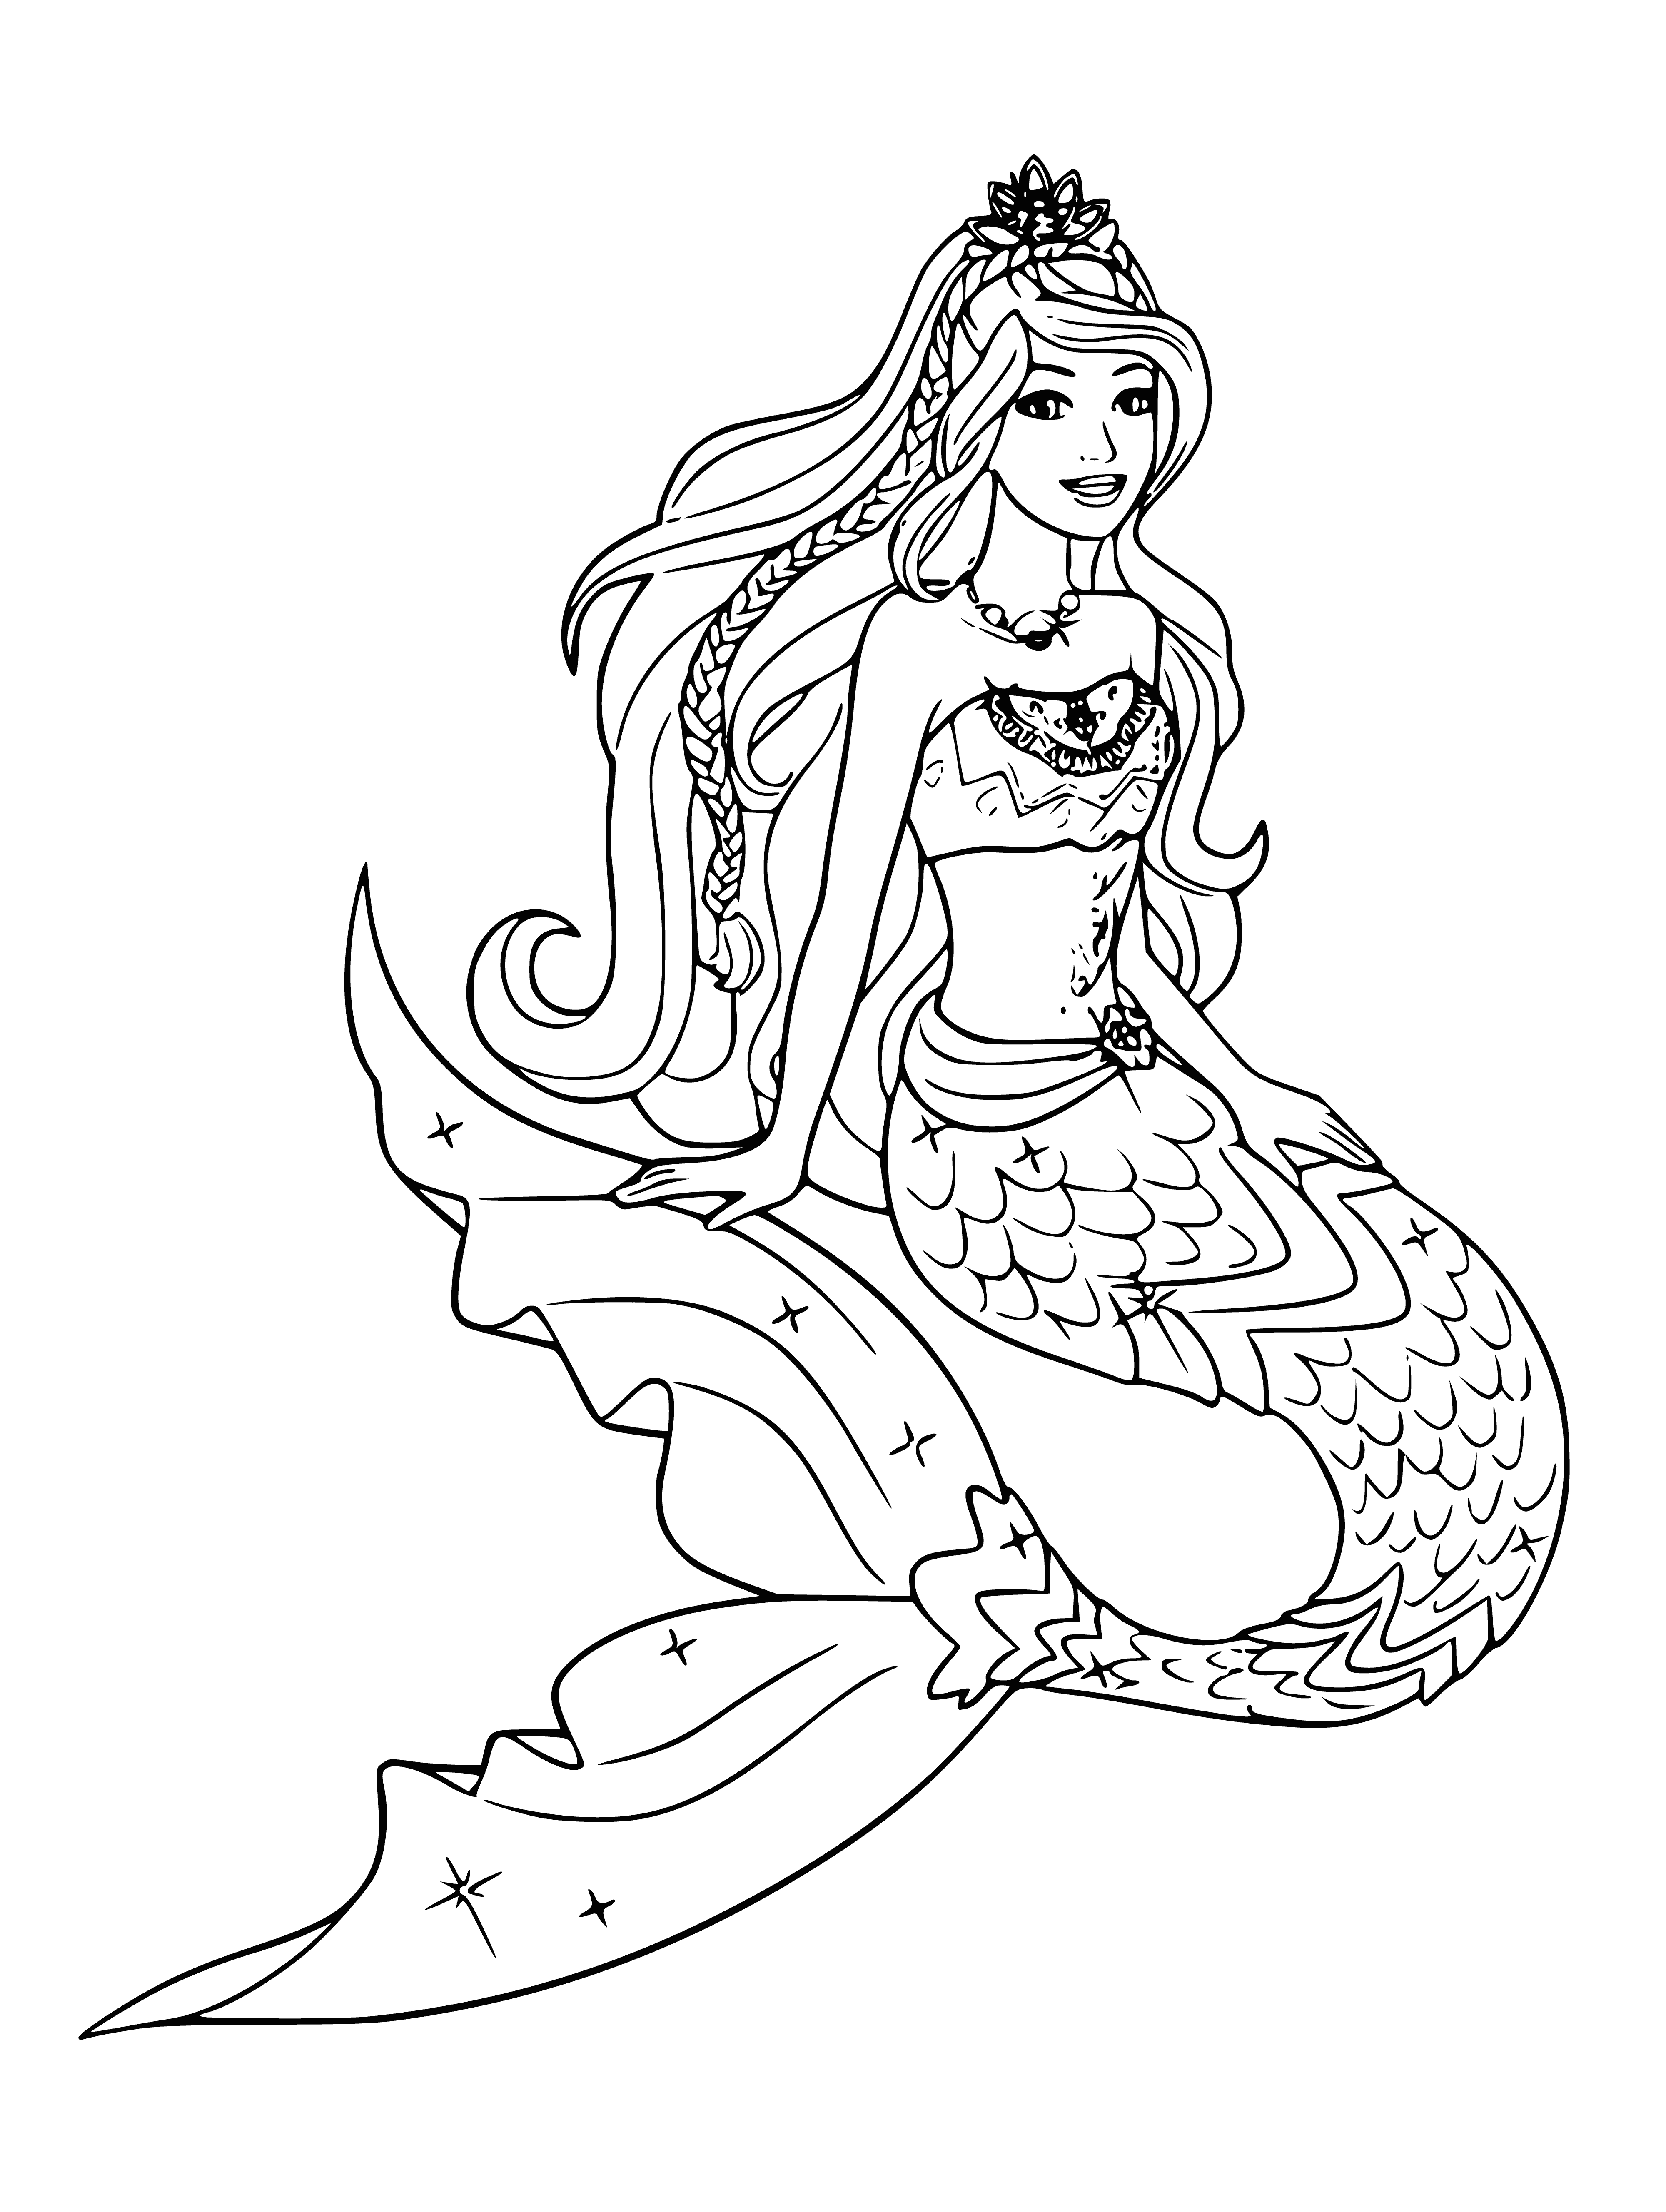 Barbie the little mermaid coloring page